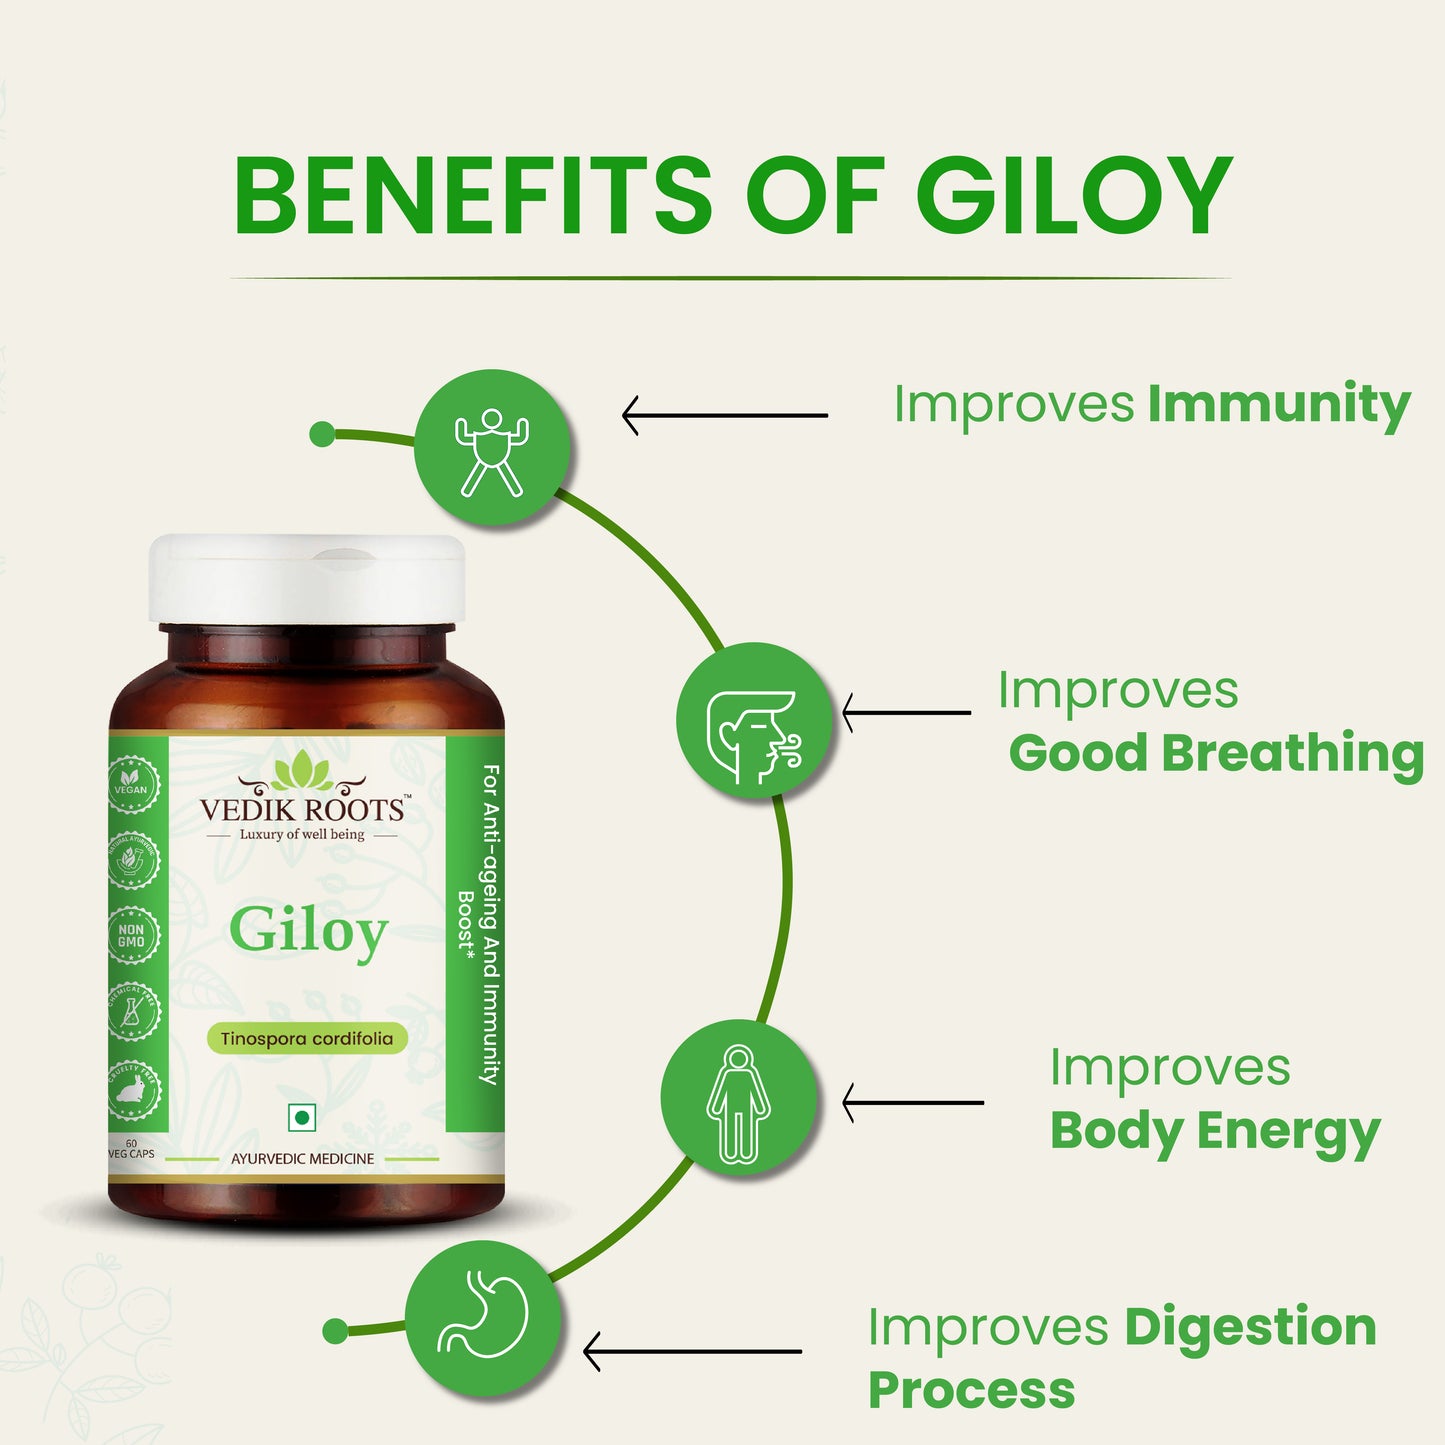 100% Pure Giloy Powder – Pure Extract – Strengthens Immunity And Fights Illnesses(100 GM)